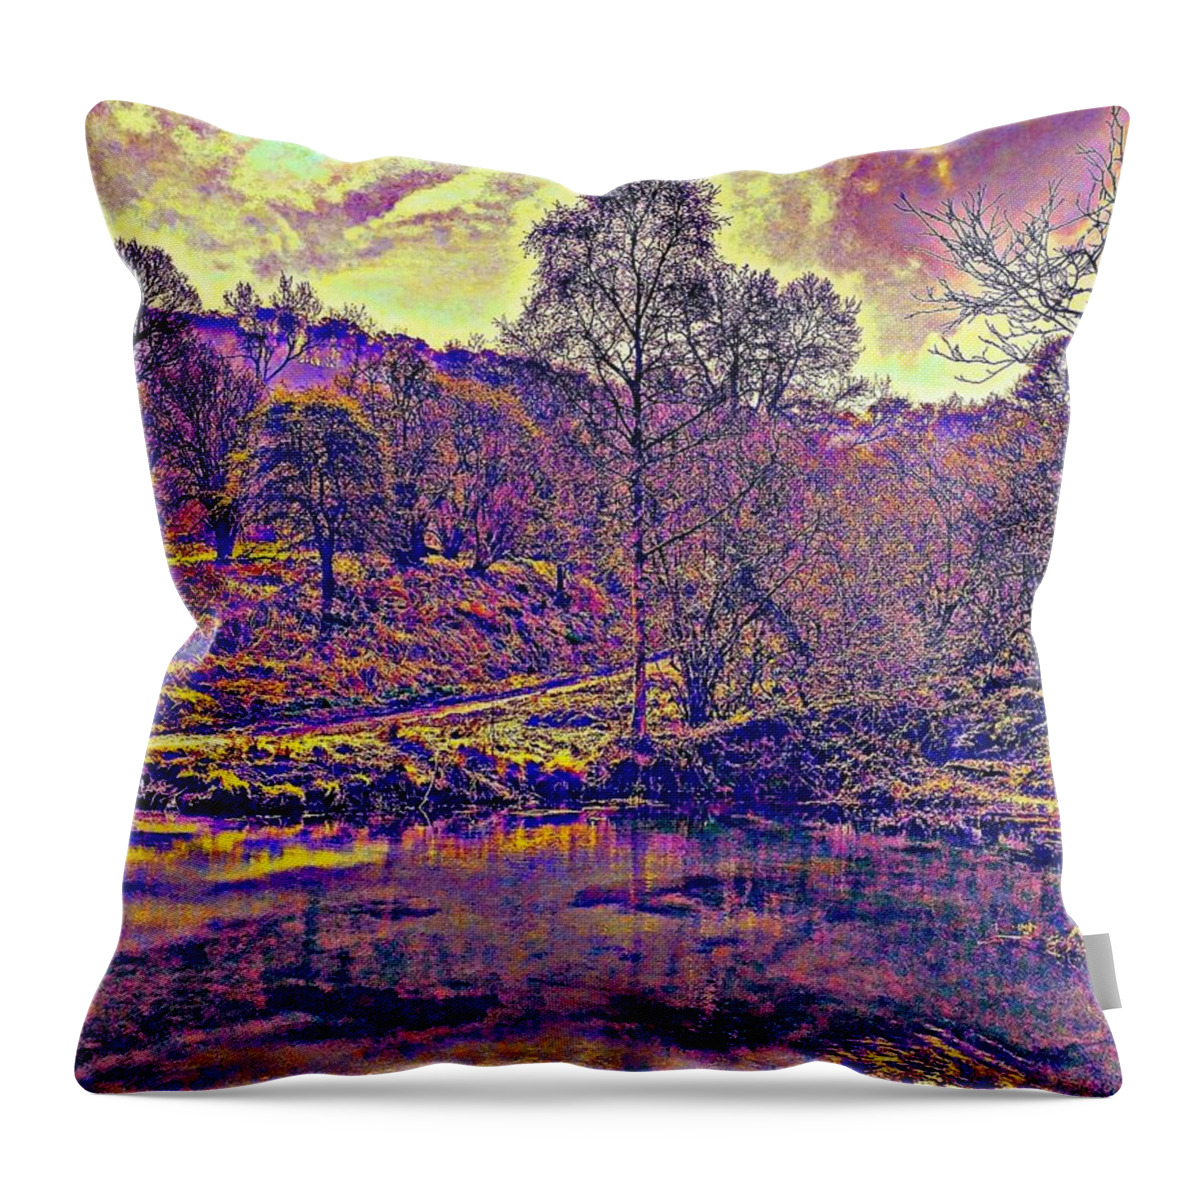 Twilight Throw Pillow featuring the photograph The Pond At Twilight by VIVA Anderson